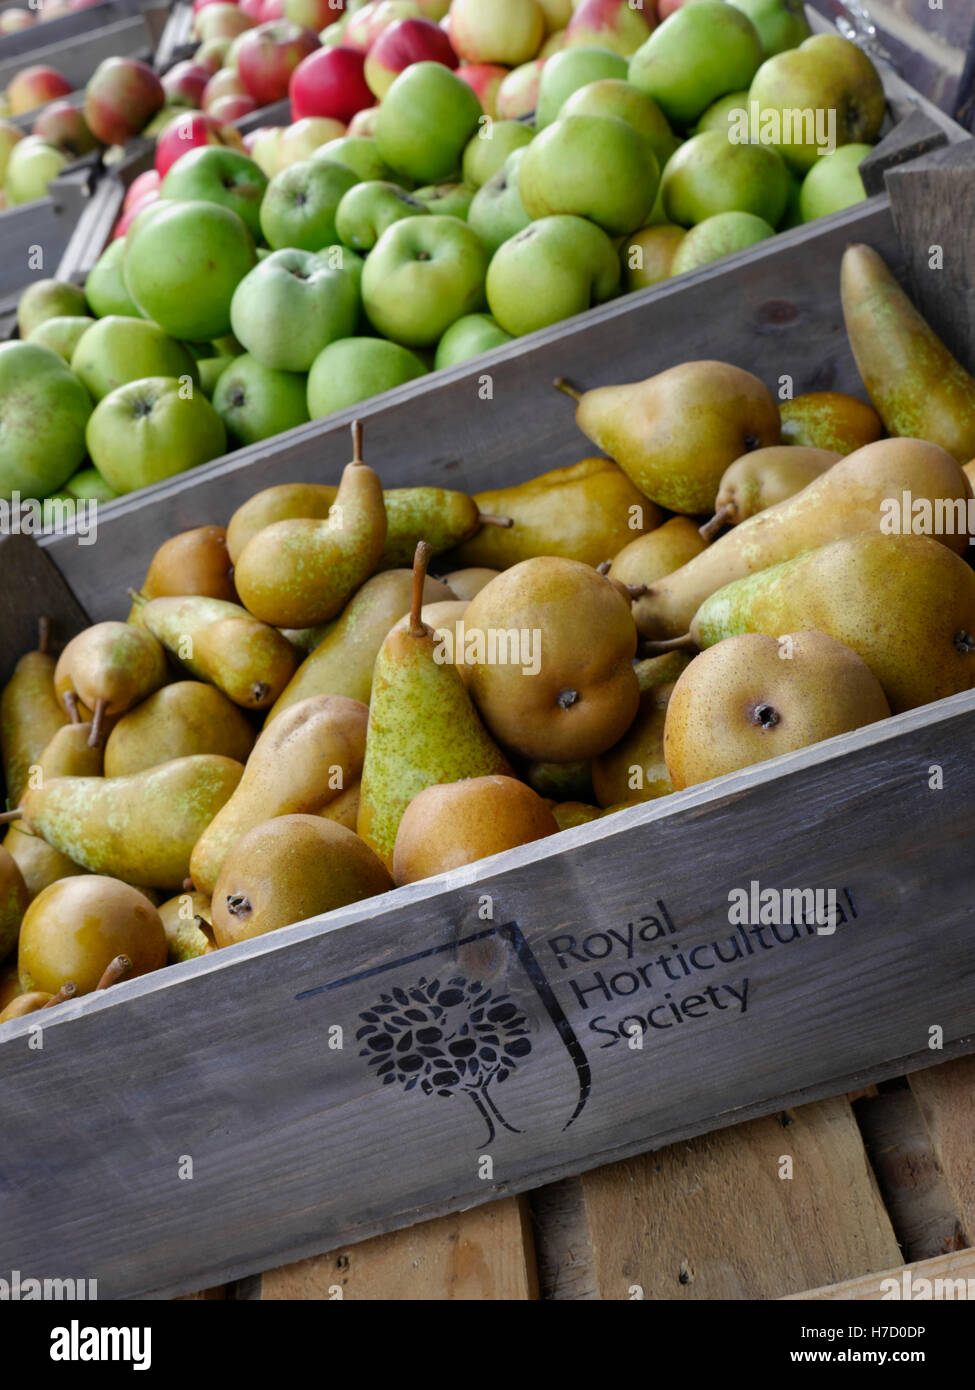 RHS Fruit stalls with Conference Pears in foreground. Autumn cultivar of European pear (Pyrus communis) on sale Wisley RHS Surrey UK Stock Photo